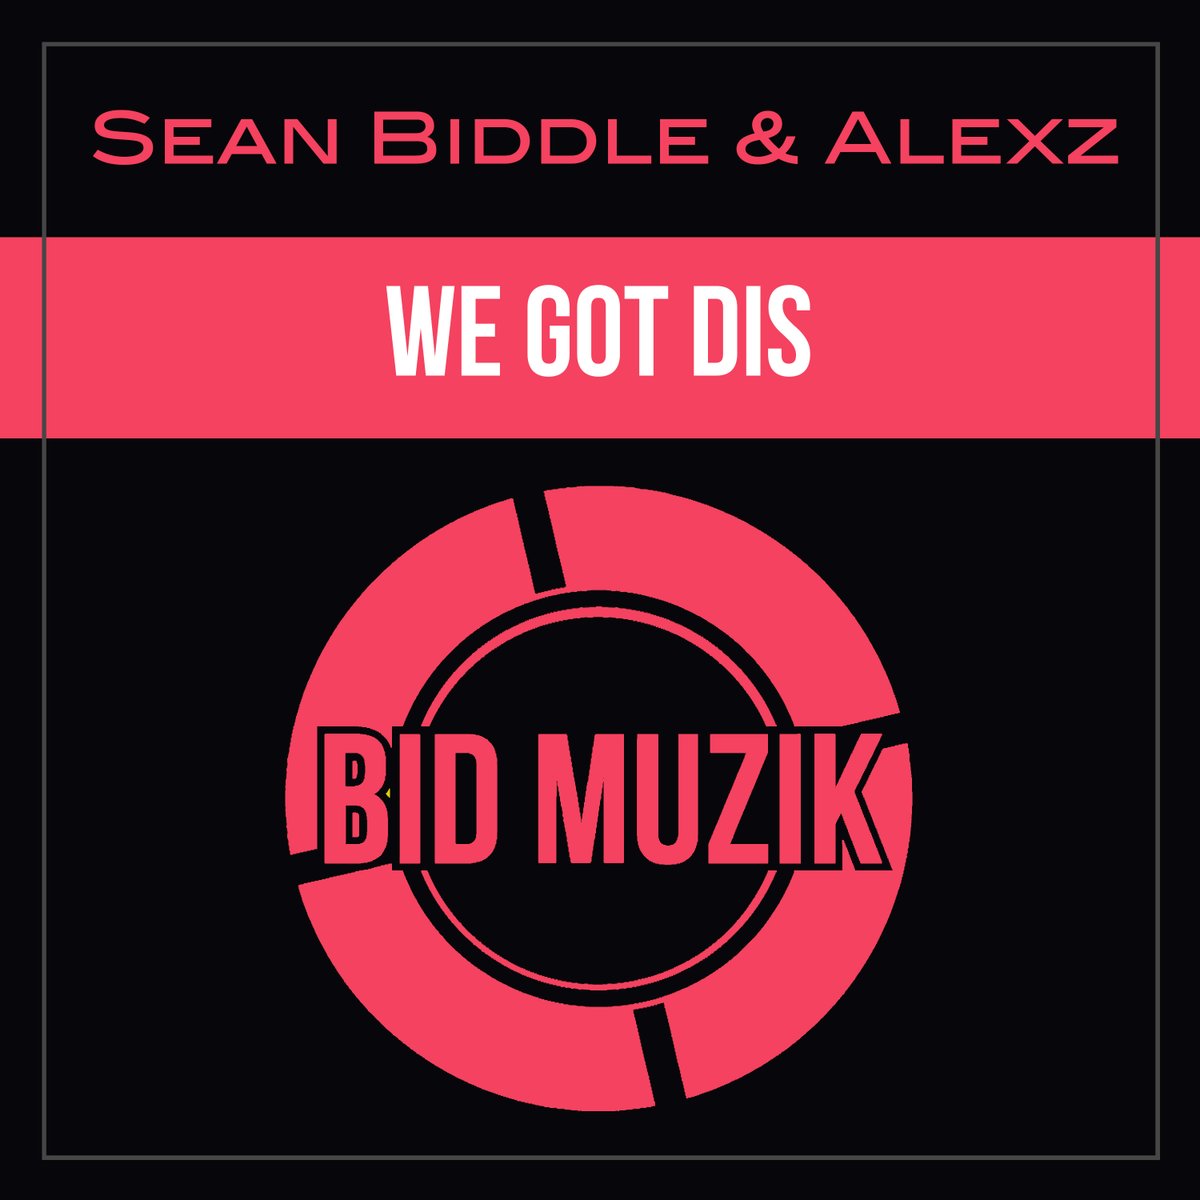 My new @bidmuzik single 'We Got Dis' with @Alexz_Official is out now on exclusive promo at @traxsource traxsource.com/track/6863067/… #bidmuzik #alexz #traxsource #jackinhouse #weekendweapons #chicago #housemusic